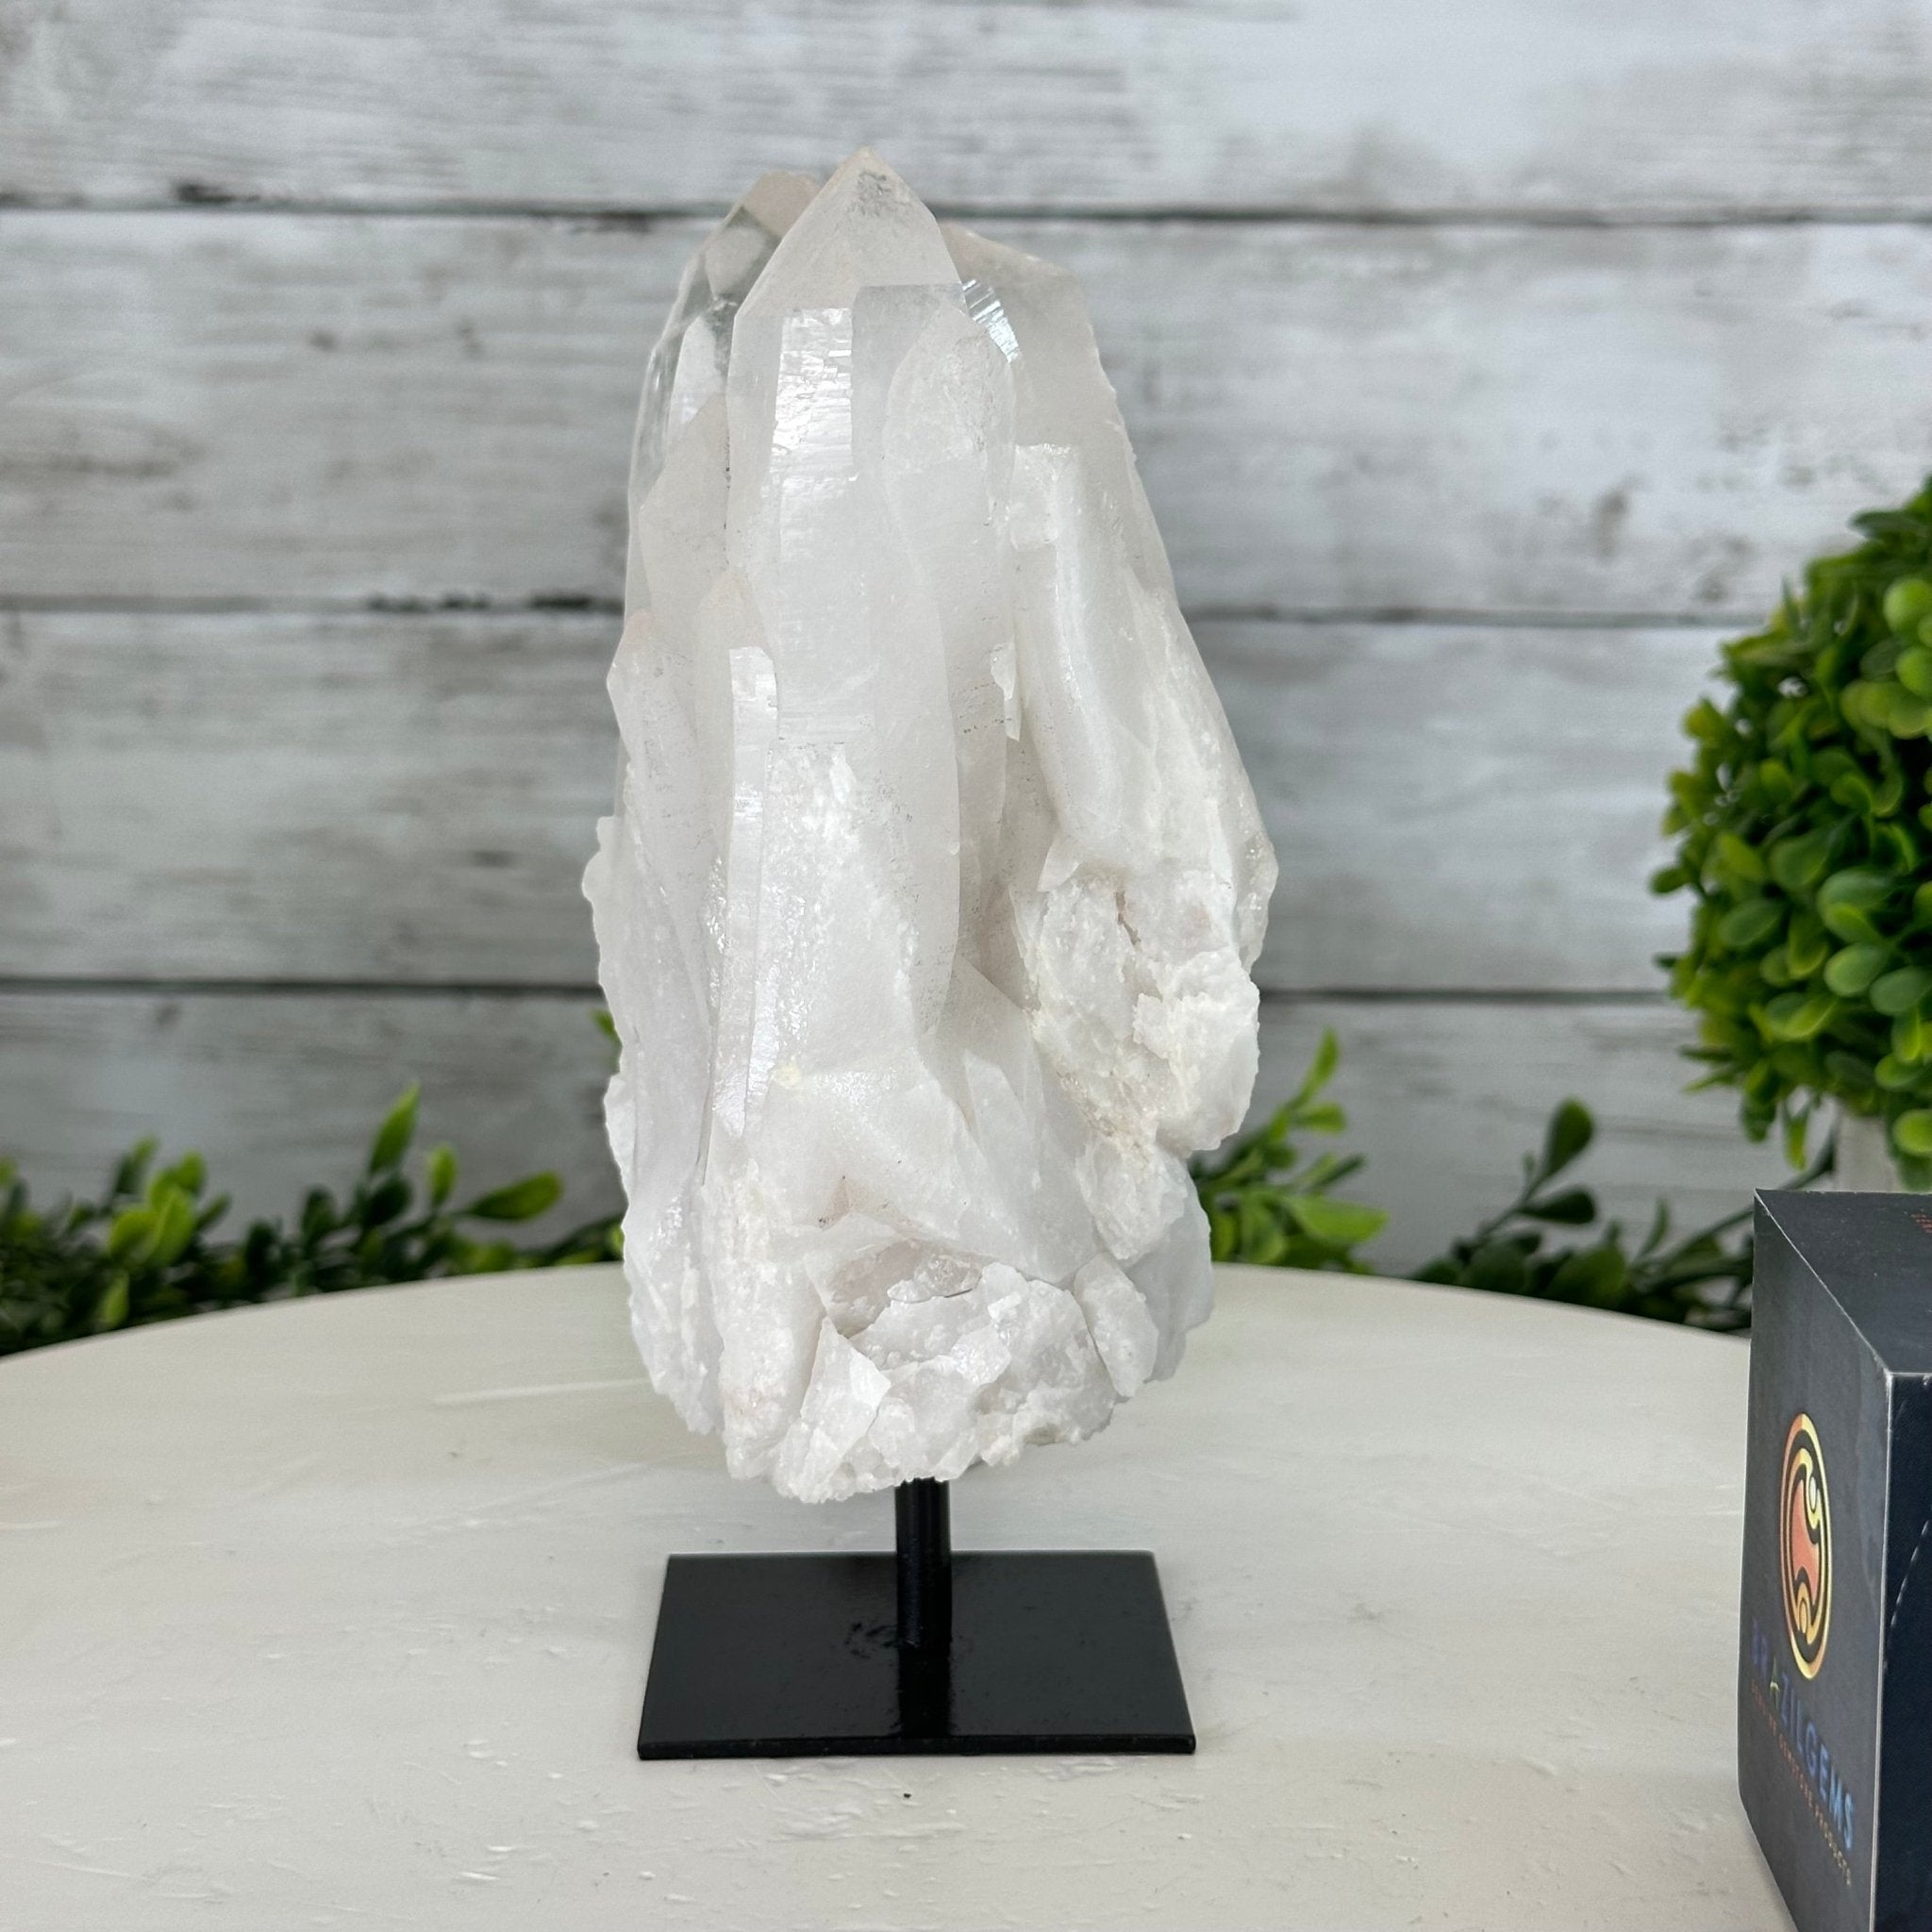 Clear Quartz Crystal Point on Fixed Base, 2.3 lbs & 6.7" Tall #3122CQ-006 - Brazil GemsBrazil GemsClear Quartz Crystal Point on Fixed Base, 2.3 lbs & 6.7" Tall #3122CQ-006Crystal Points3122CQ-006